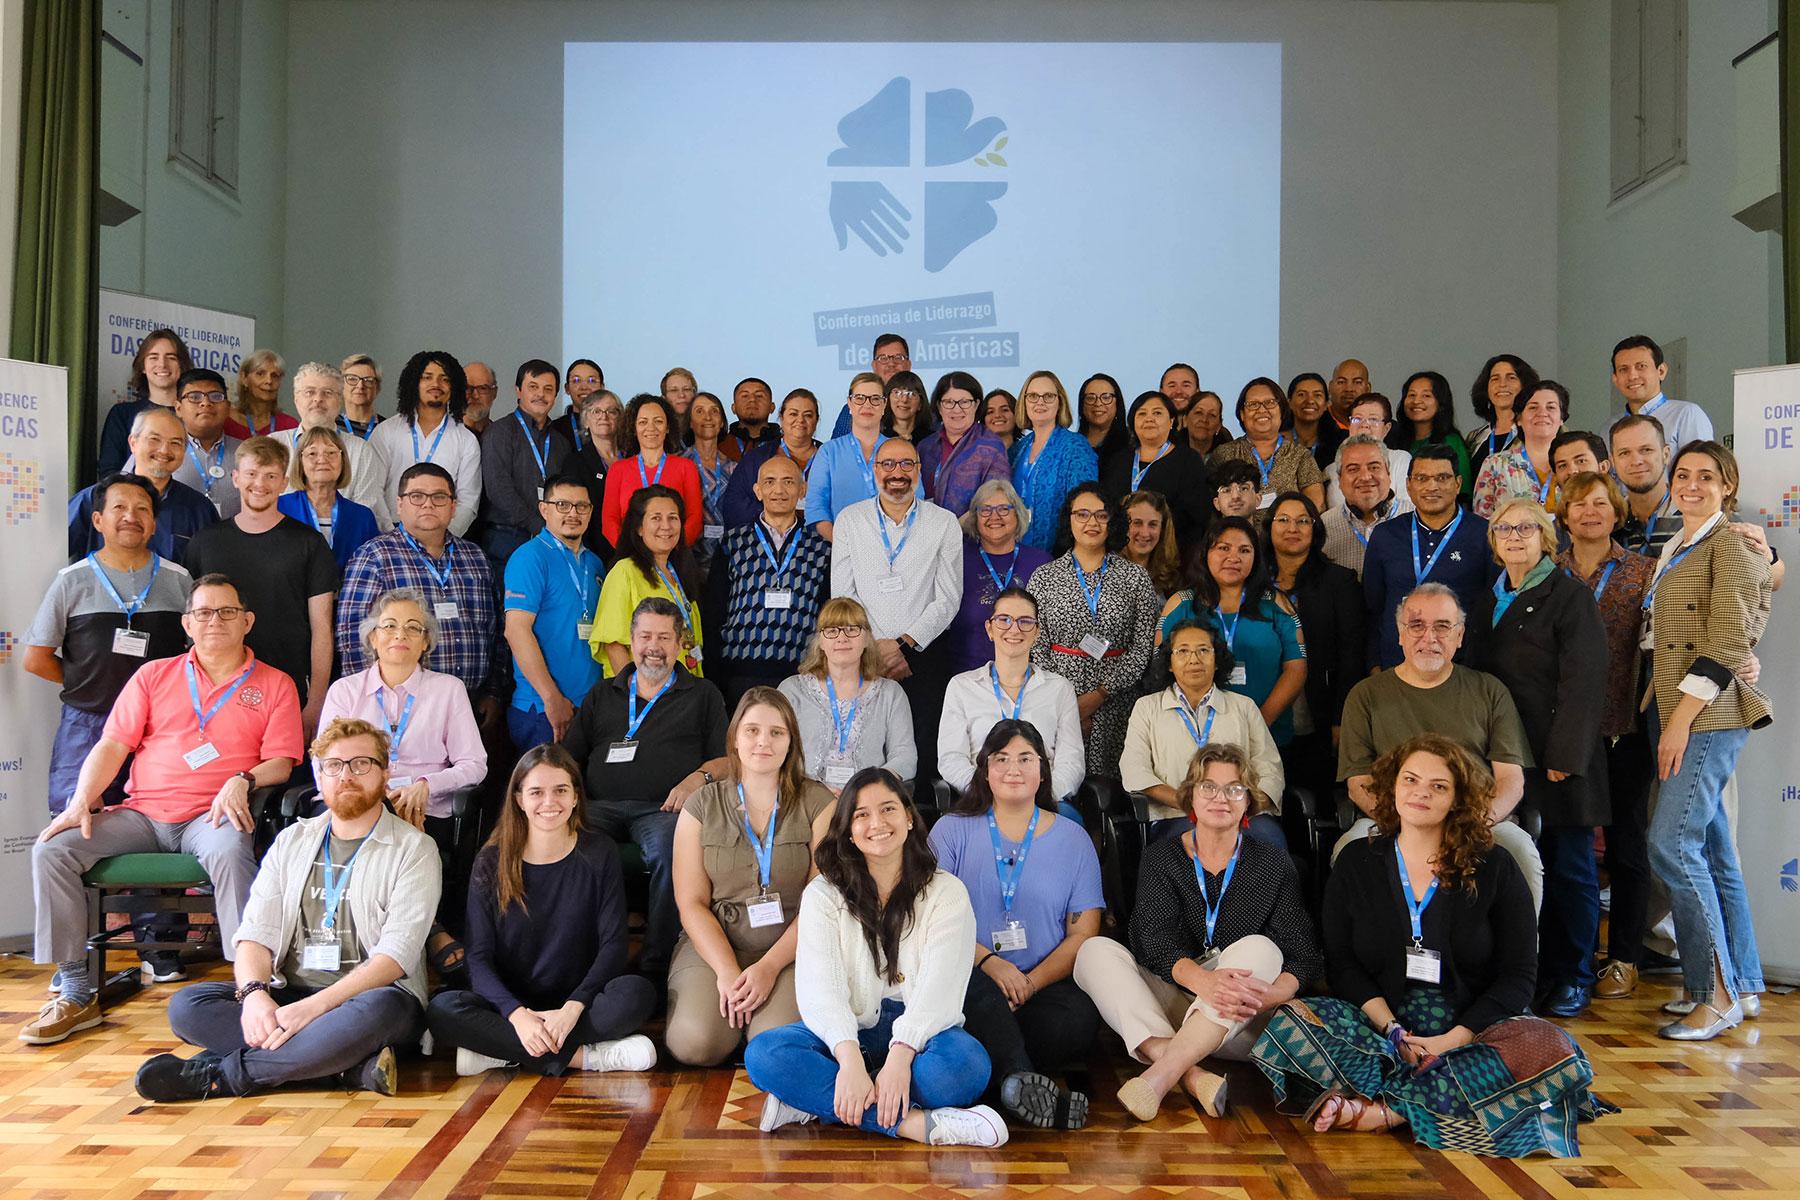 Participants of the Leadership Conference of the Americas (COL) in São Leopoldo, Brazil, 15-19 April 2024. Photo: LWF/Gabriela Giese